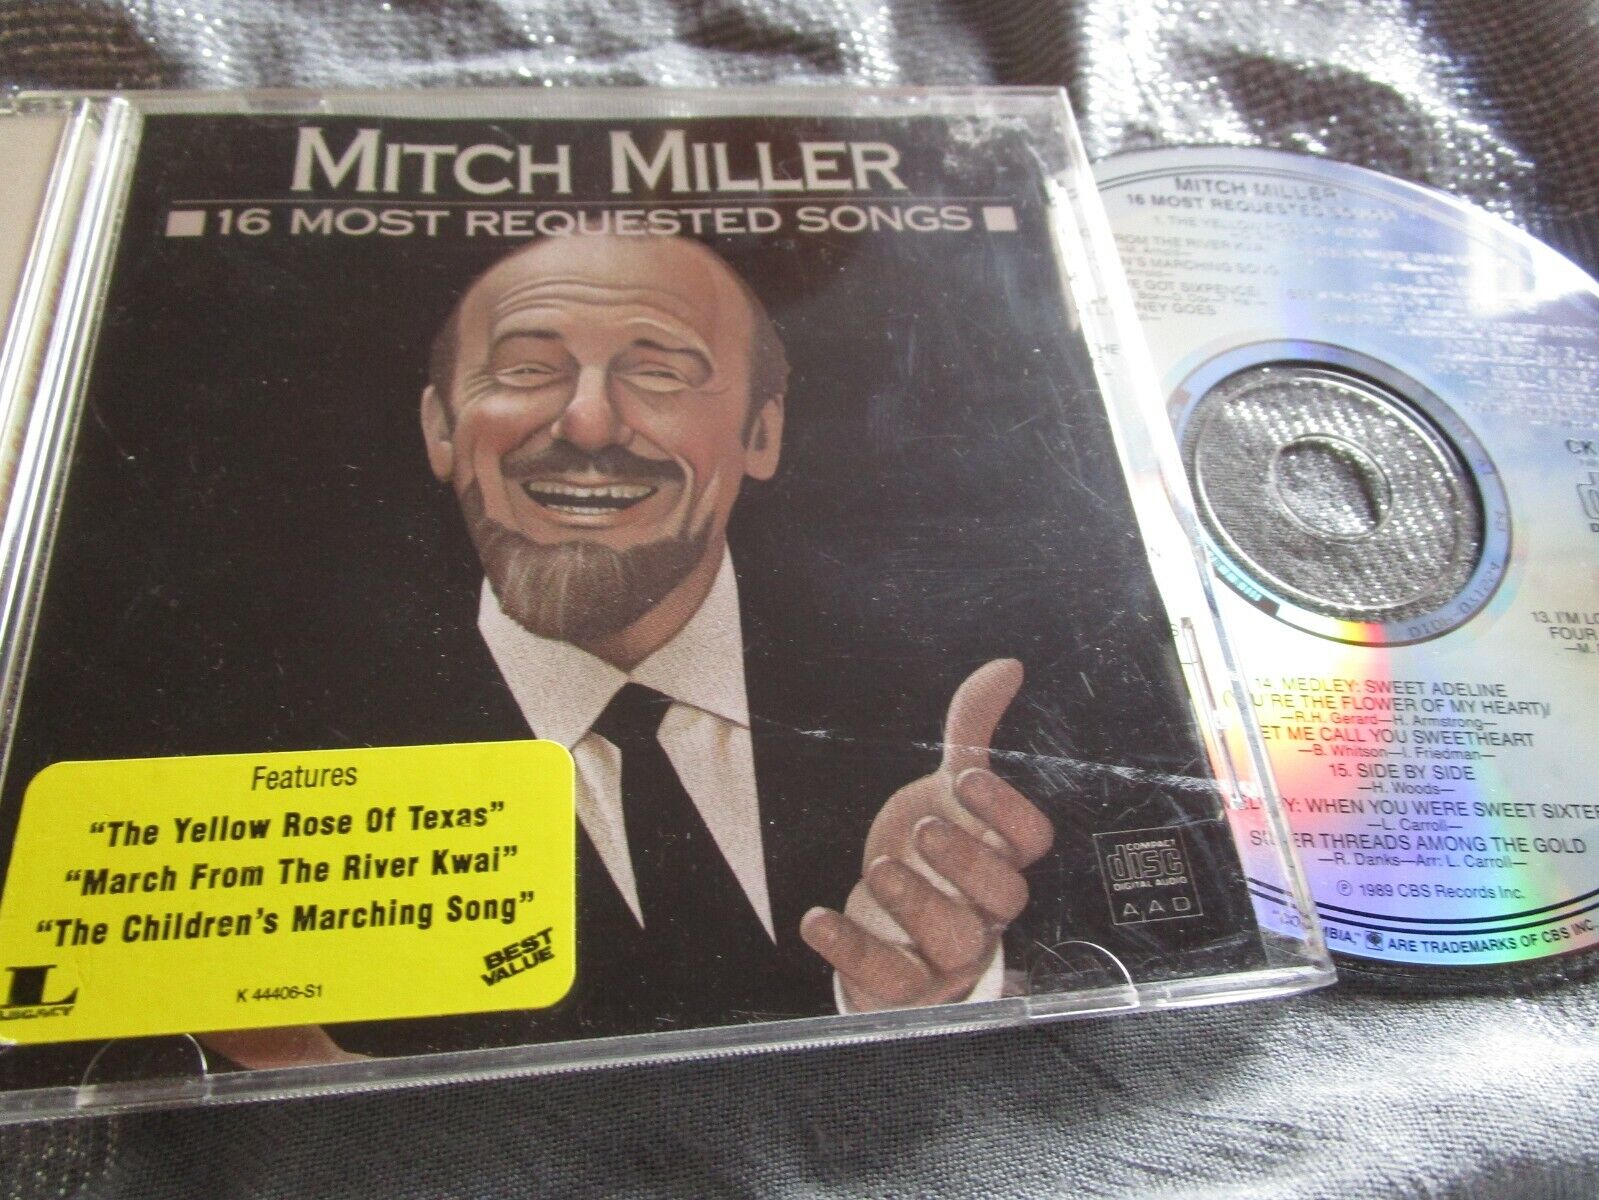 Mitch Miller 16 Most Requested Songs Columbia CK 44406 CD Album